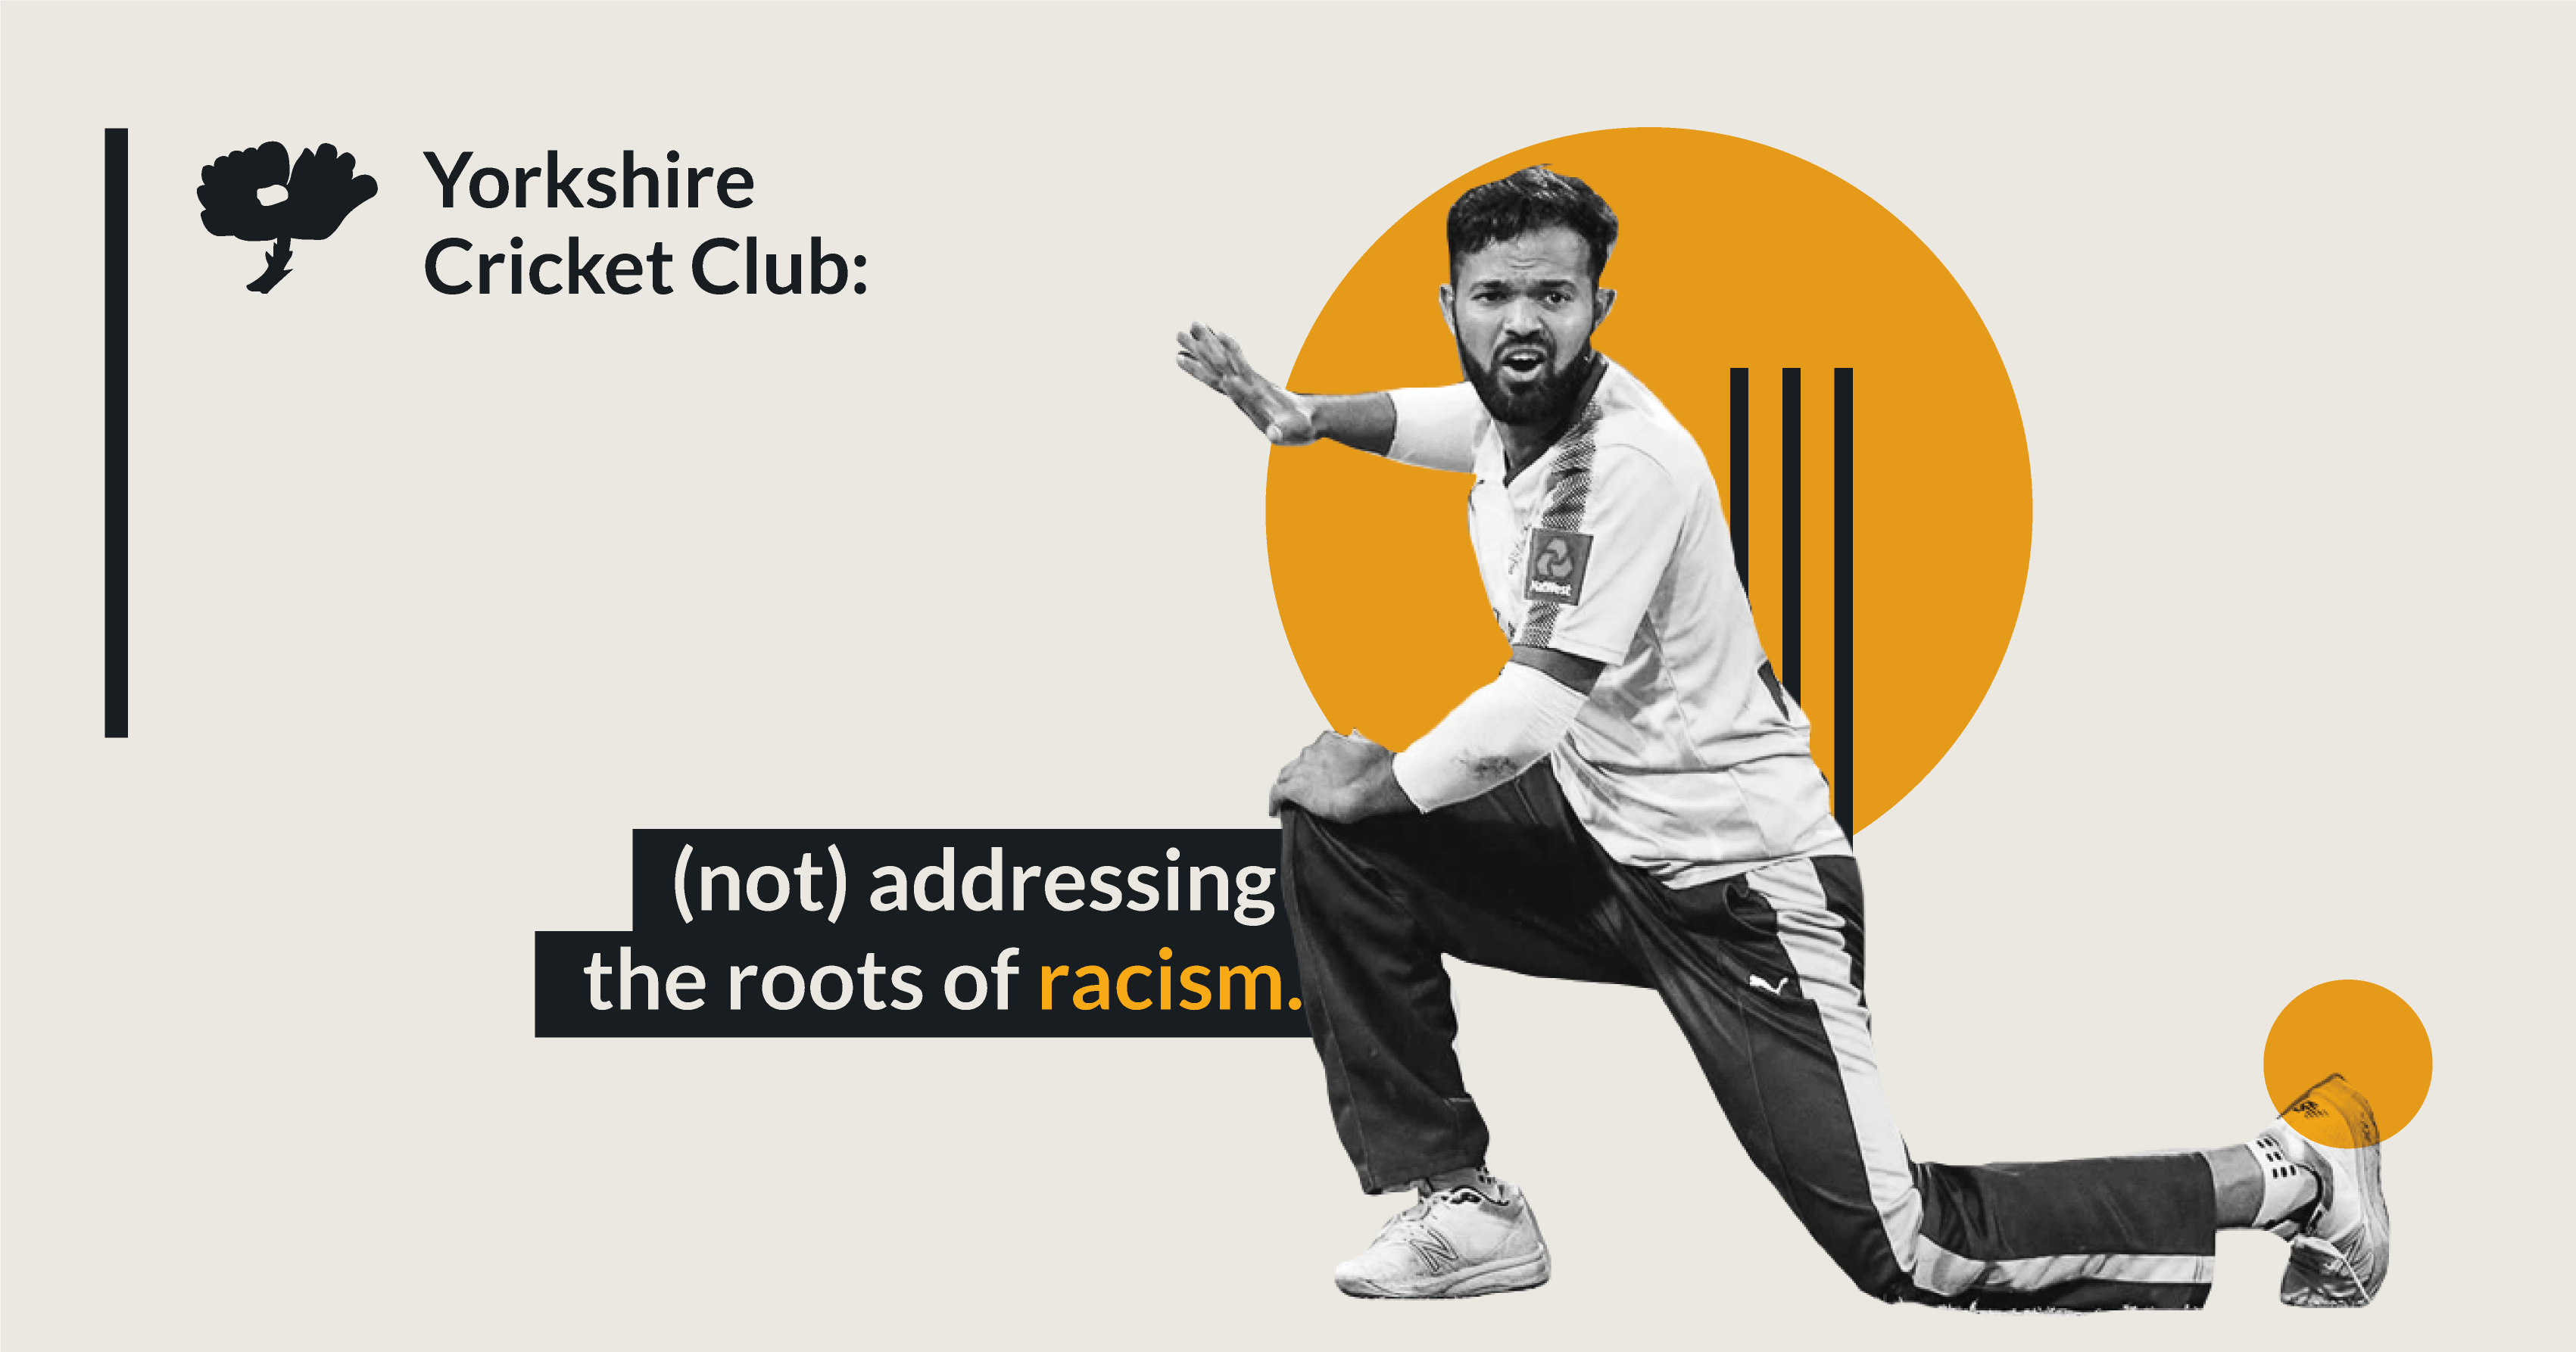 Yorkshire Cricket Club: (Not) addressing the roots of racism